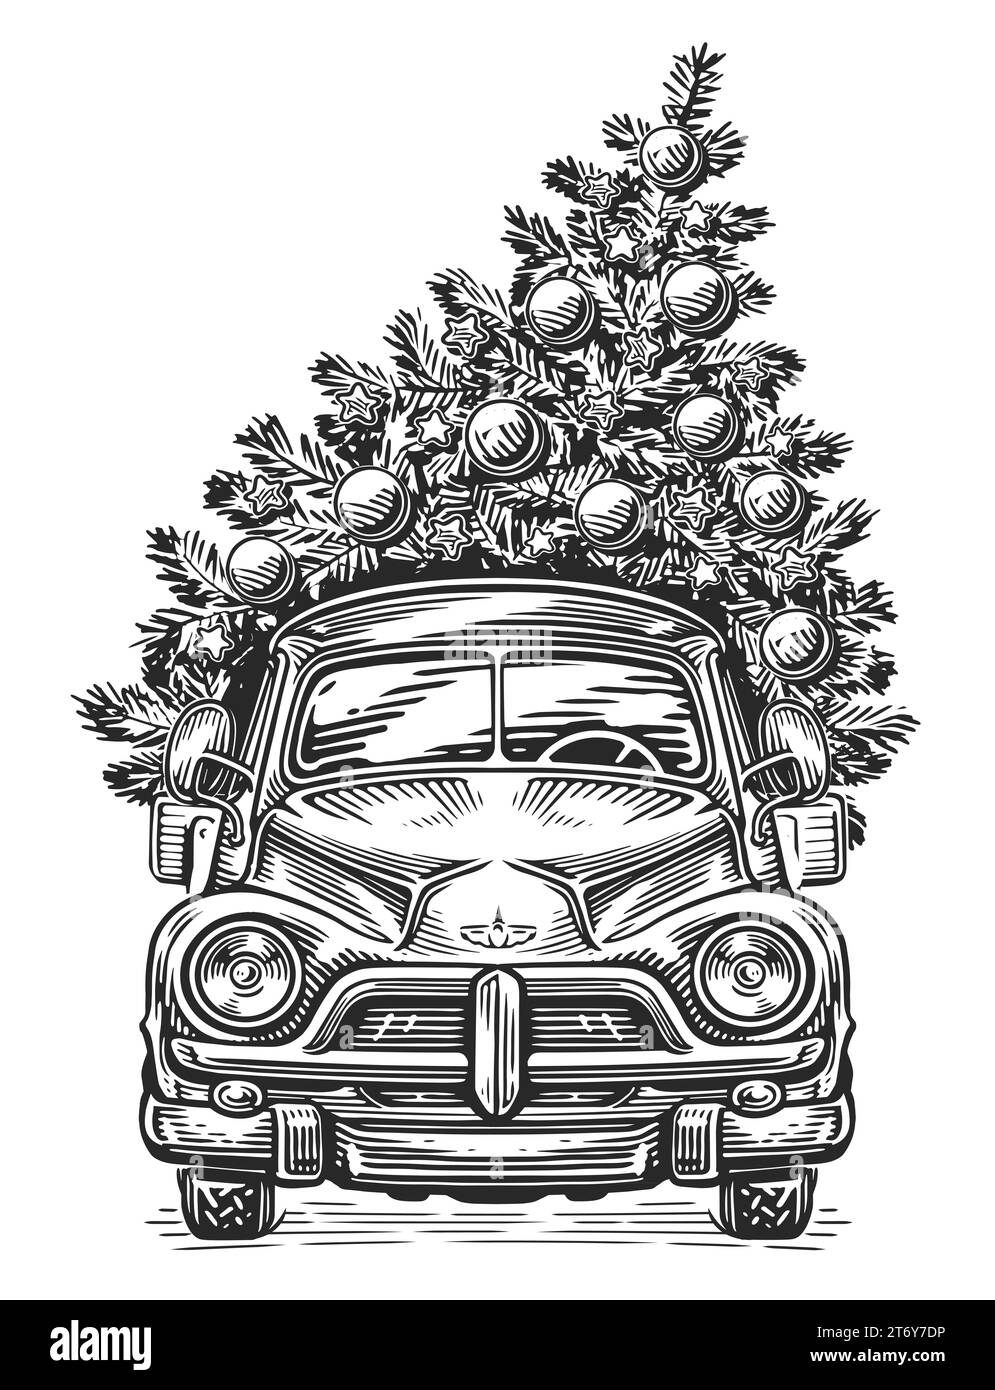 Hand drawn farm truck and Christmas tree with decorations. Retro sketch illustration Stock Photo